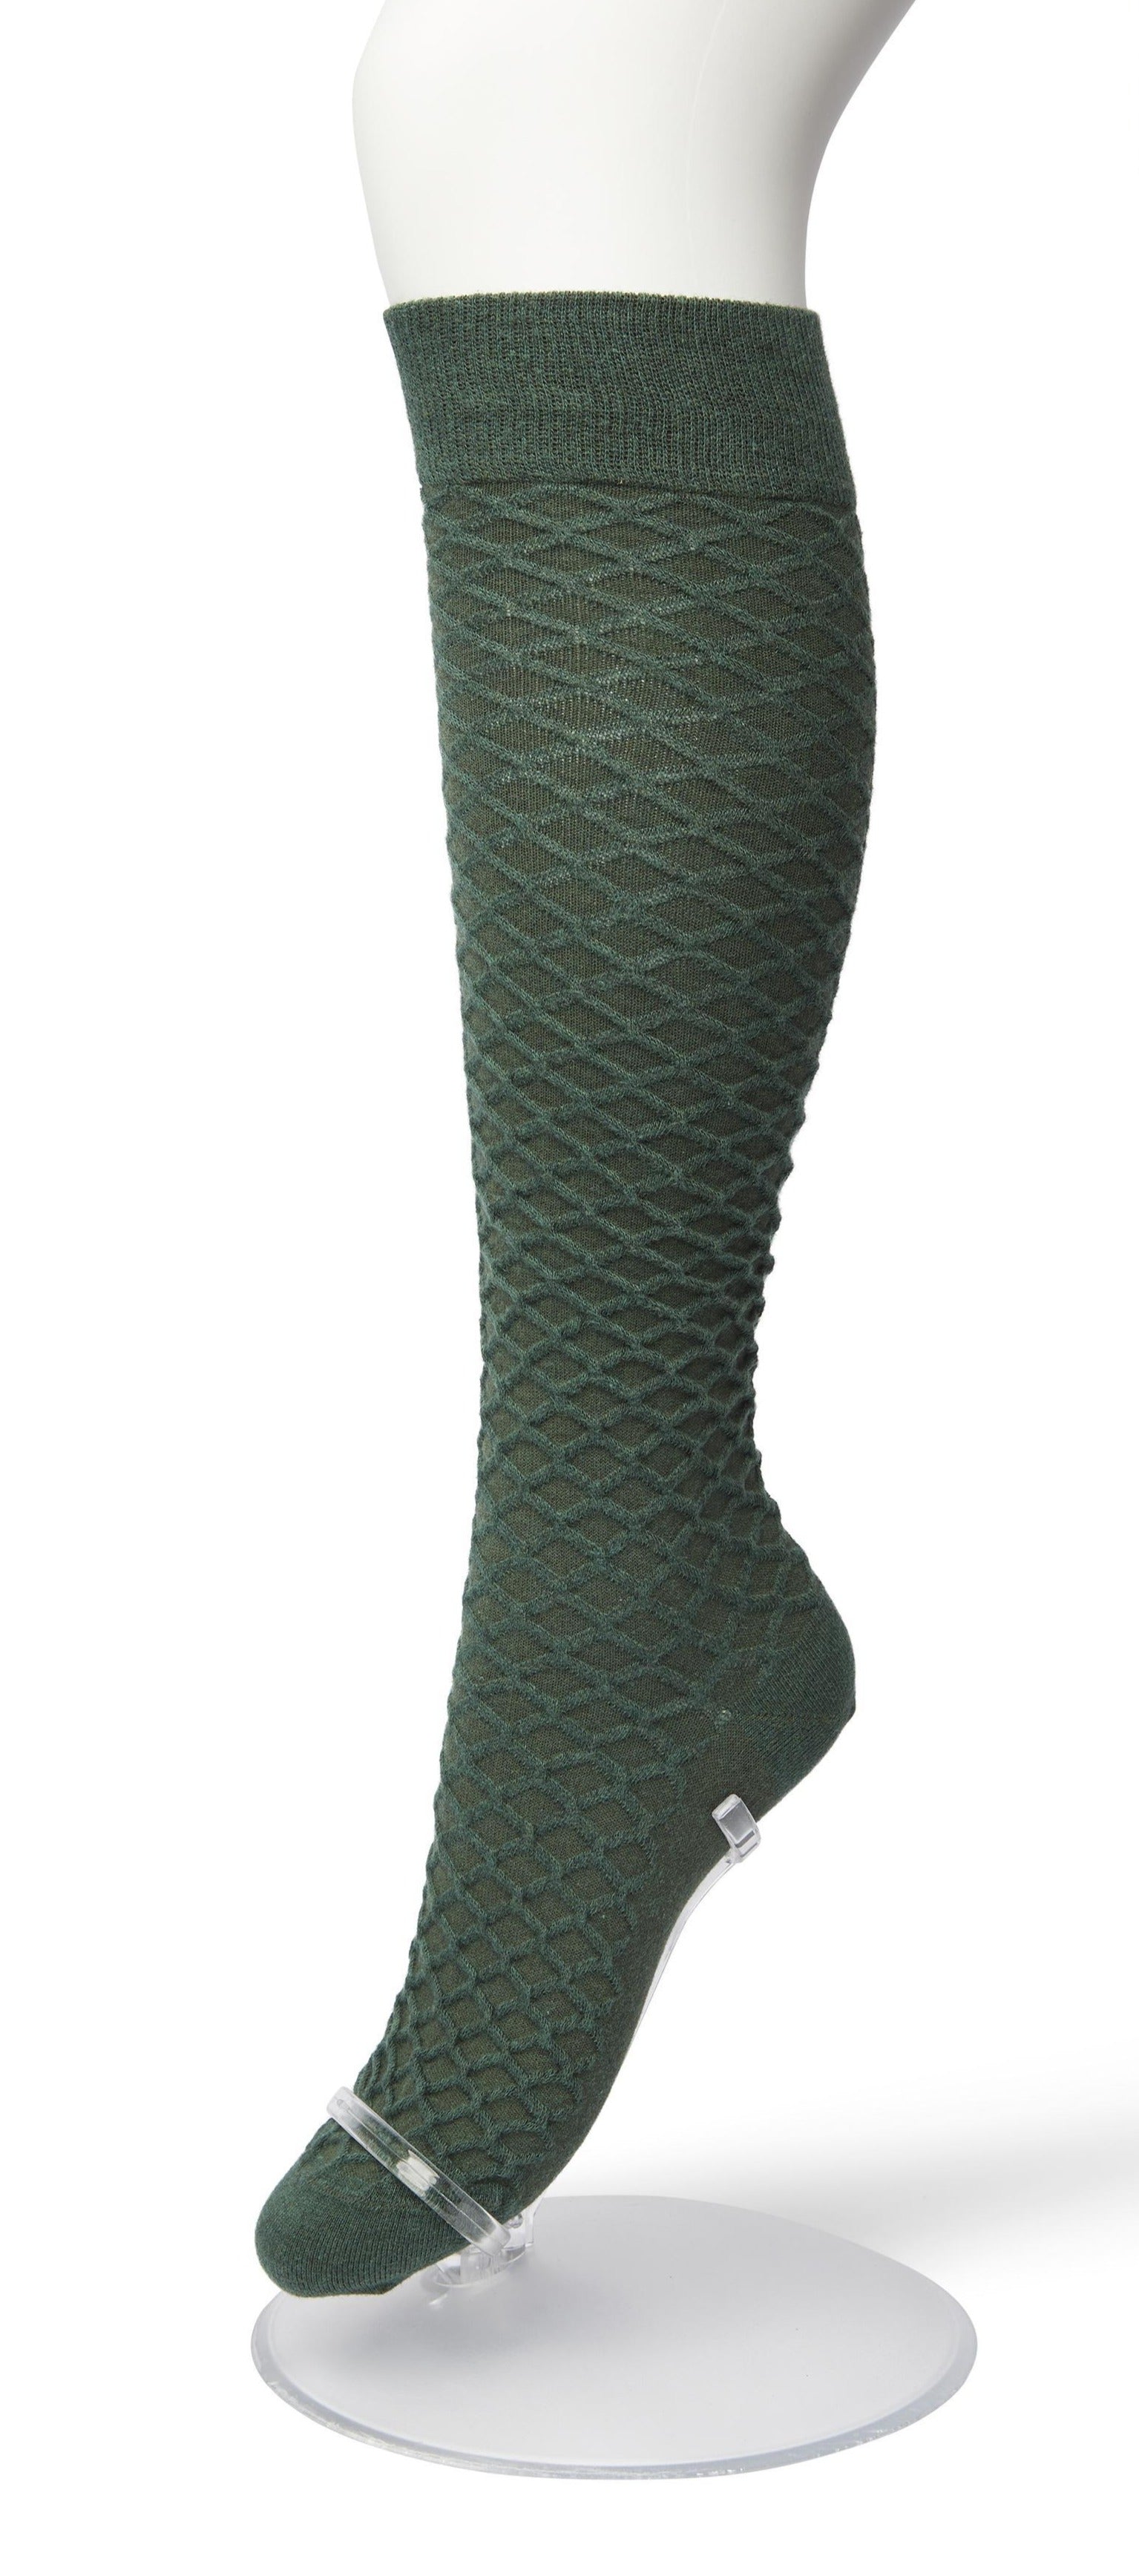 Bonnie Doon BP211506 Cable Knee-highs - Bottle green (sycamore) soft and warm knitted knee-high socks with a criss-cross diamond textured pattern